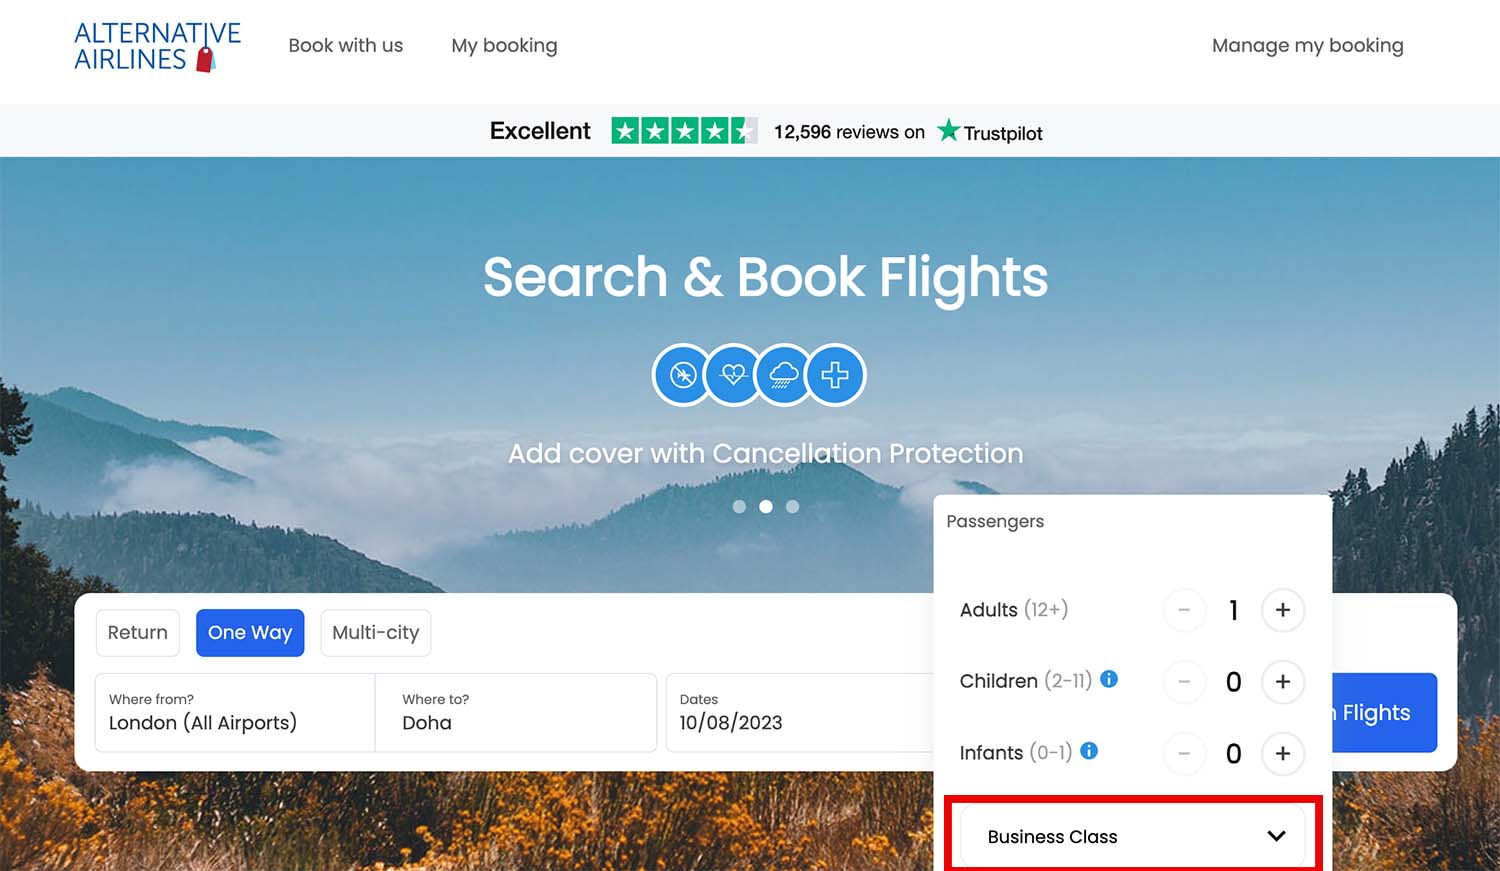 step 1 - search for flights in the search form